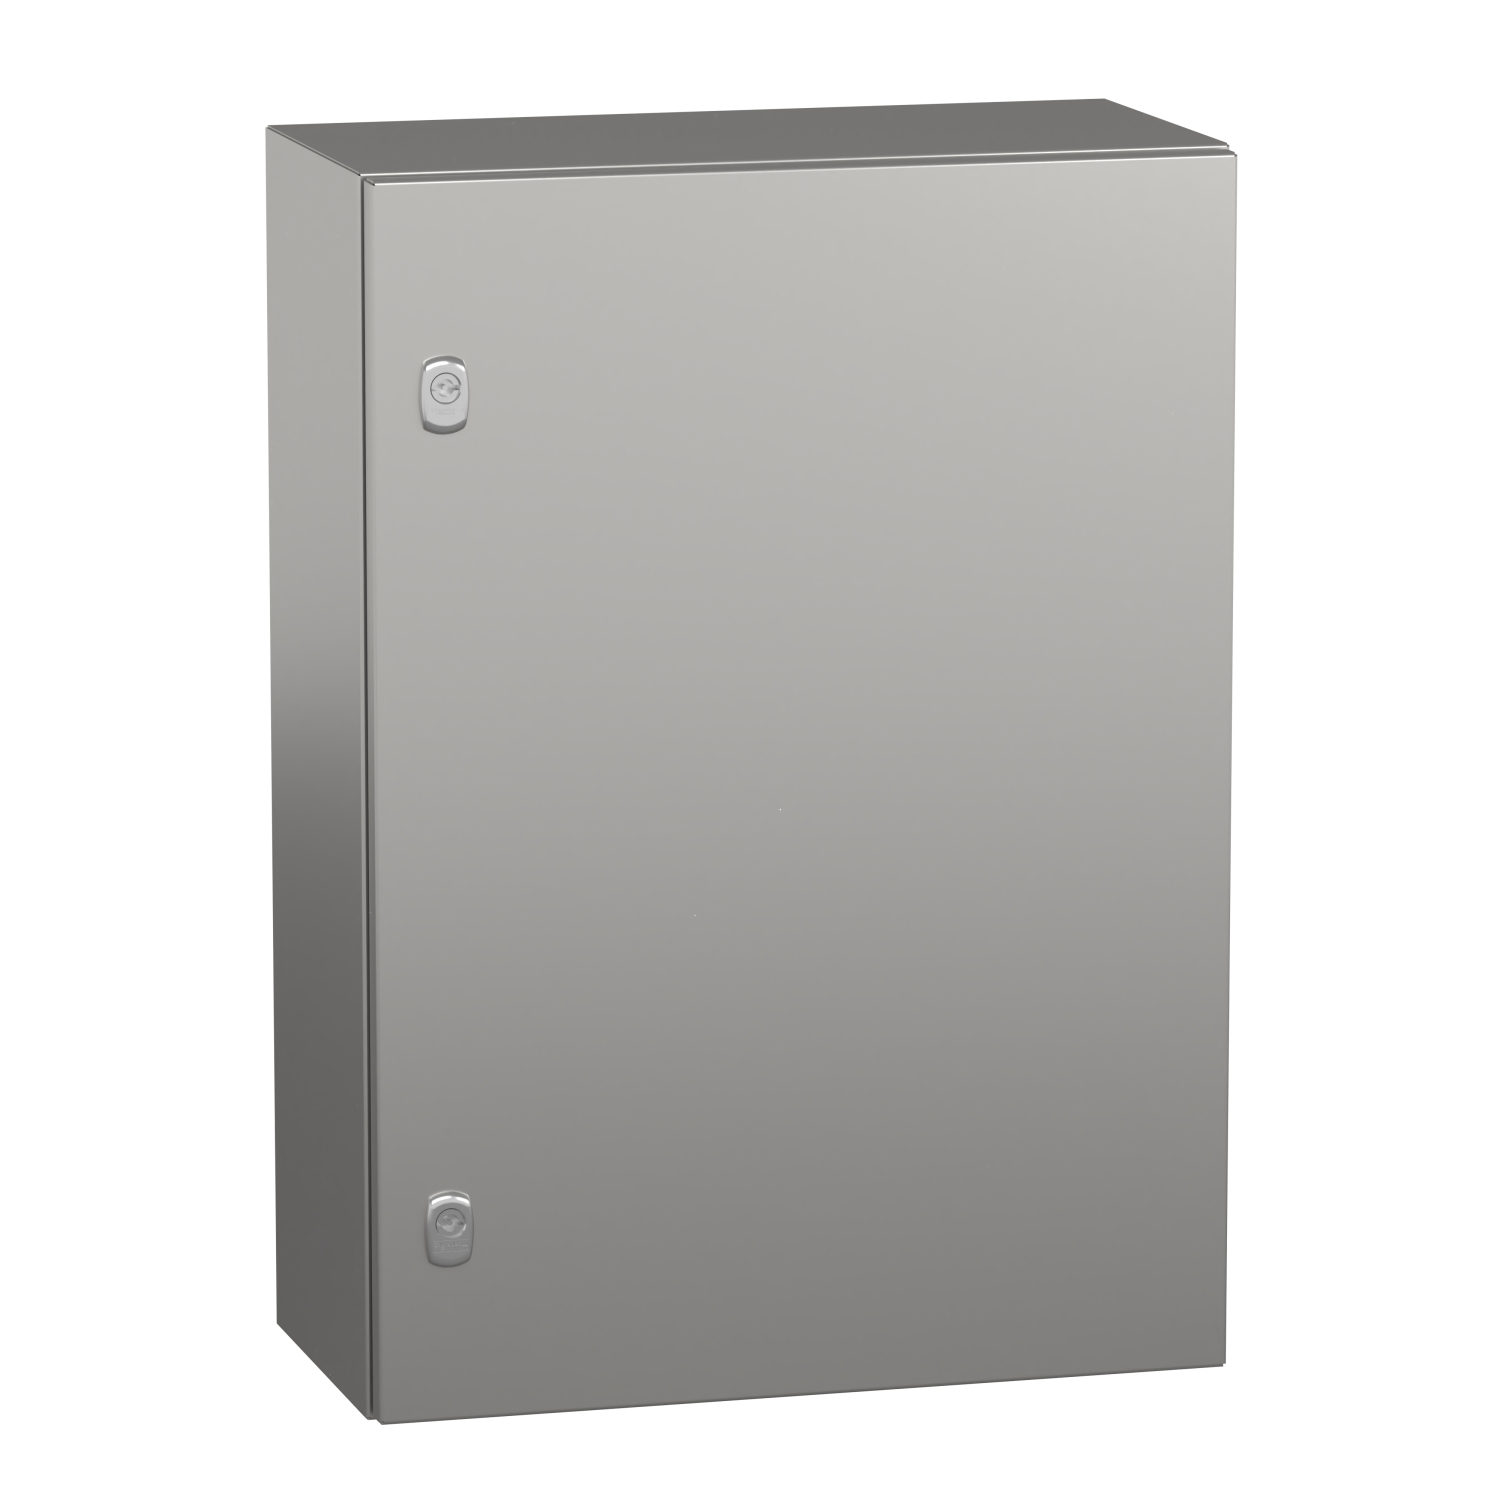 Wall mounted enclosure, Spacial S3X, stainless steel 304L, plain door, 700x500x250mm, IP66